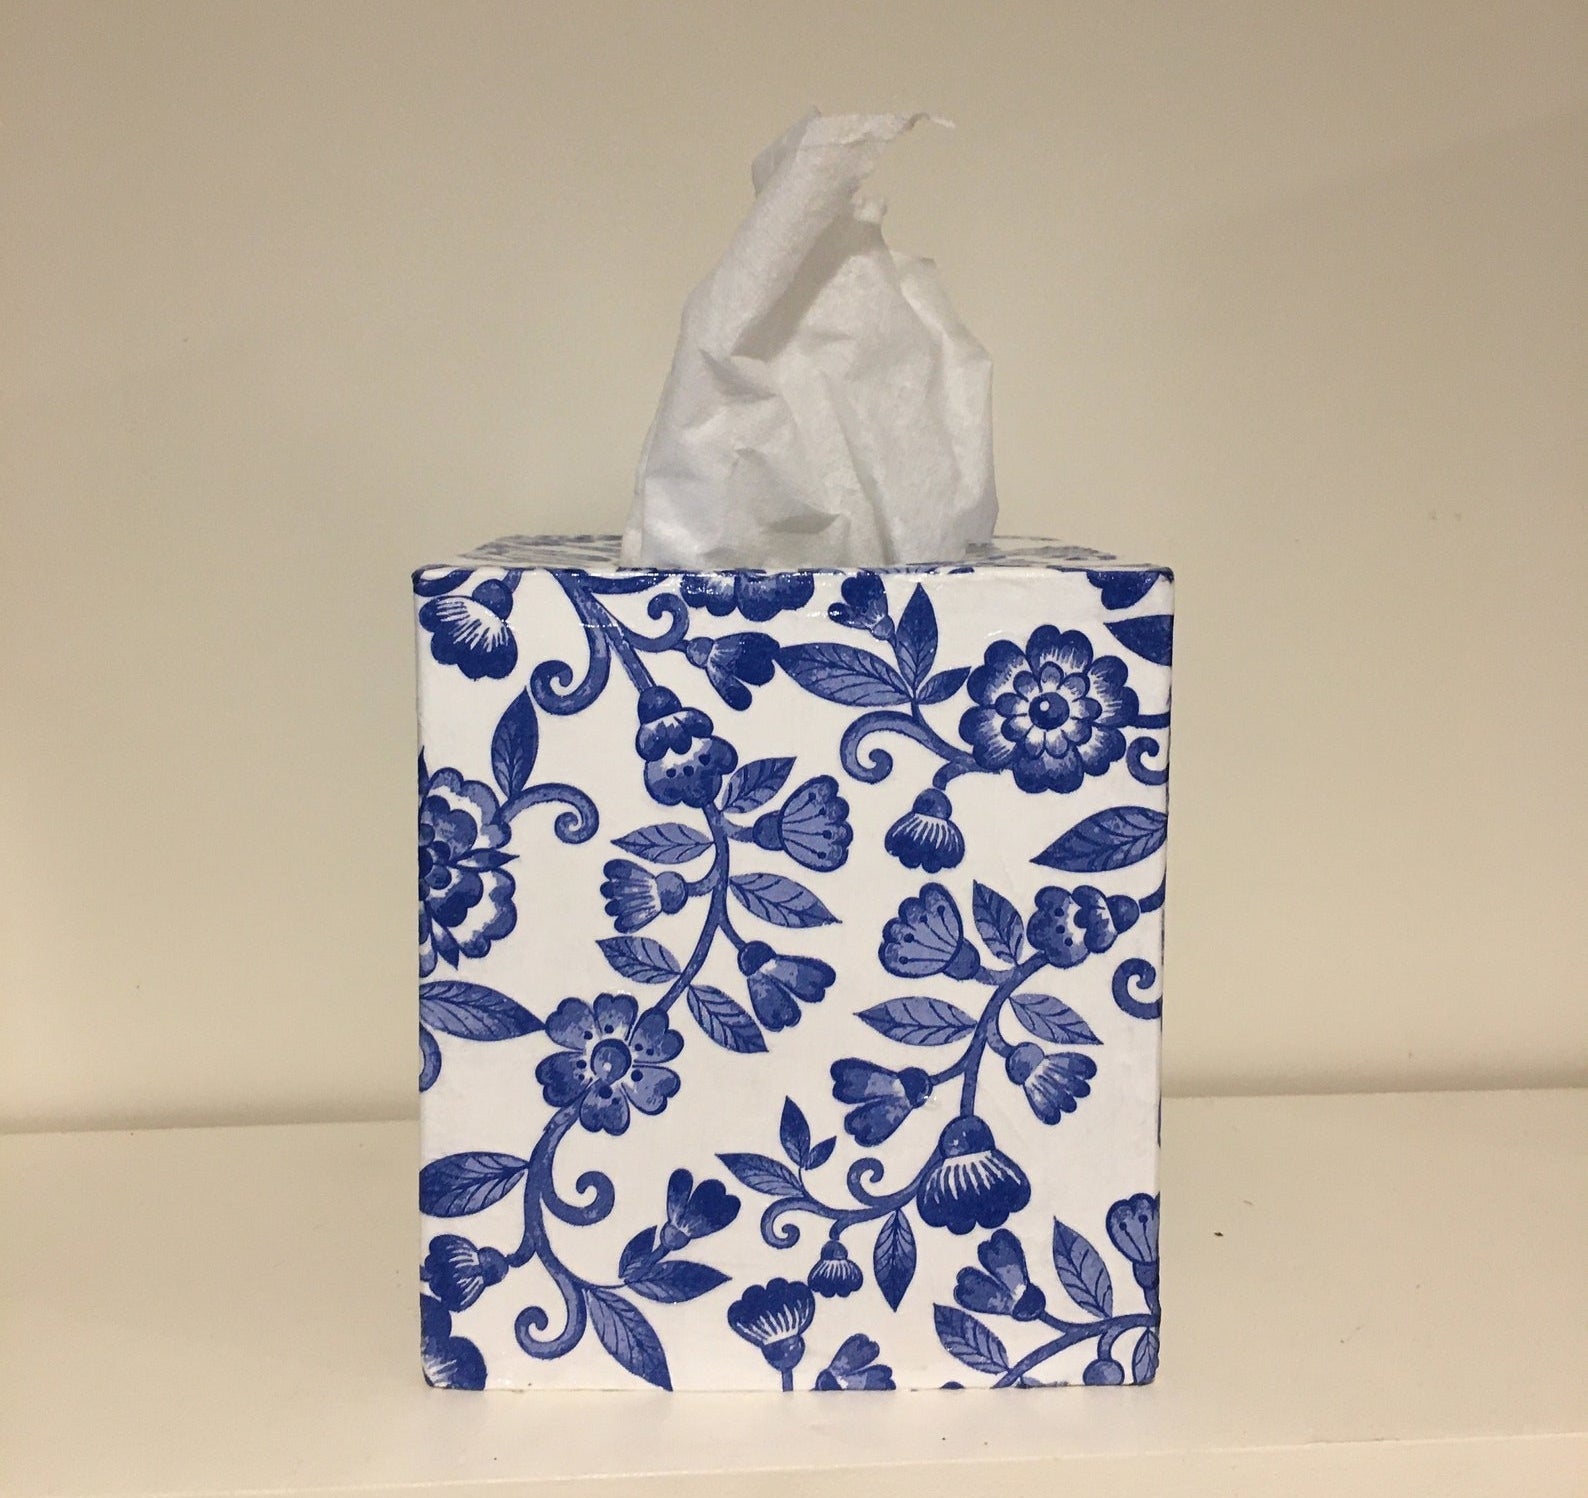 The white tissue box cover with blue flowers and vines painted throughout